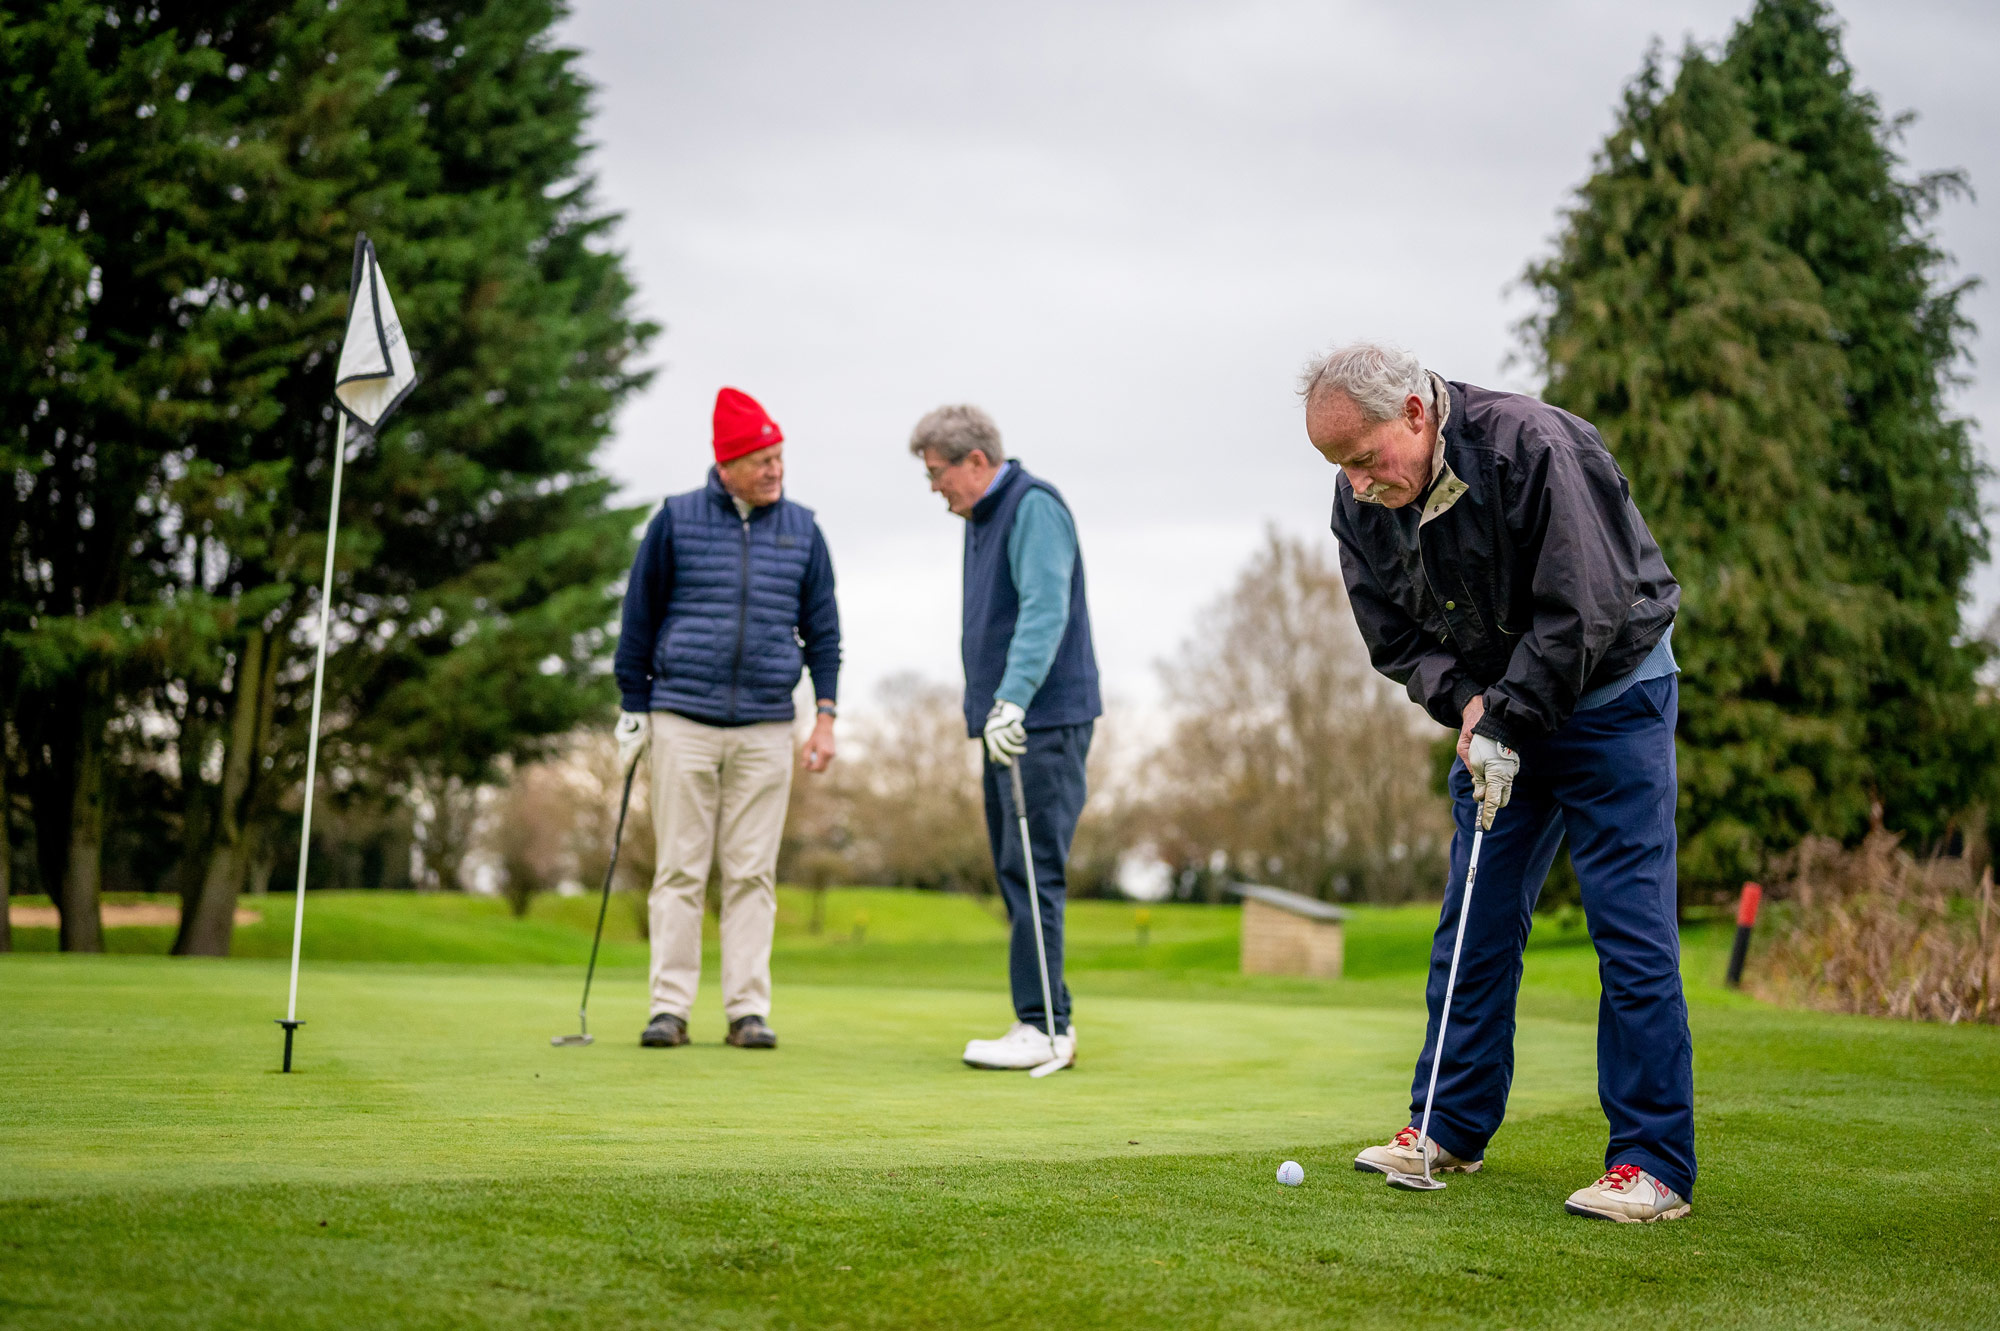 Anglemont Estates Golf Club: Enjoy a round of golf at our local course, Anglemont Estates Golf Club. This 9-hole course also features a practice range, putting green, cart and club rentals and BBQ facilities.